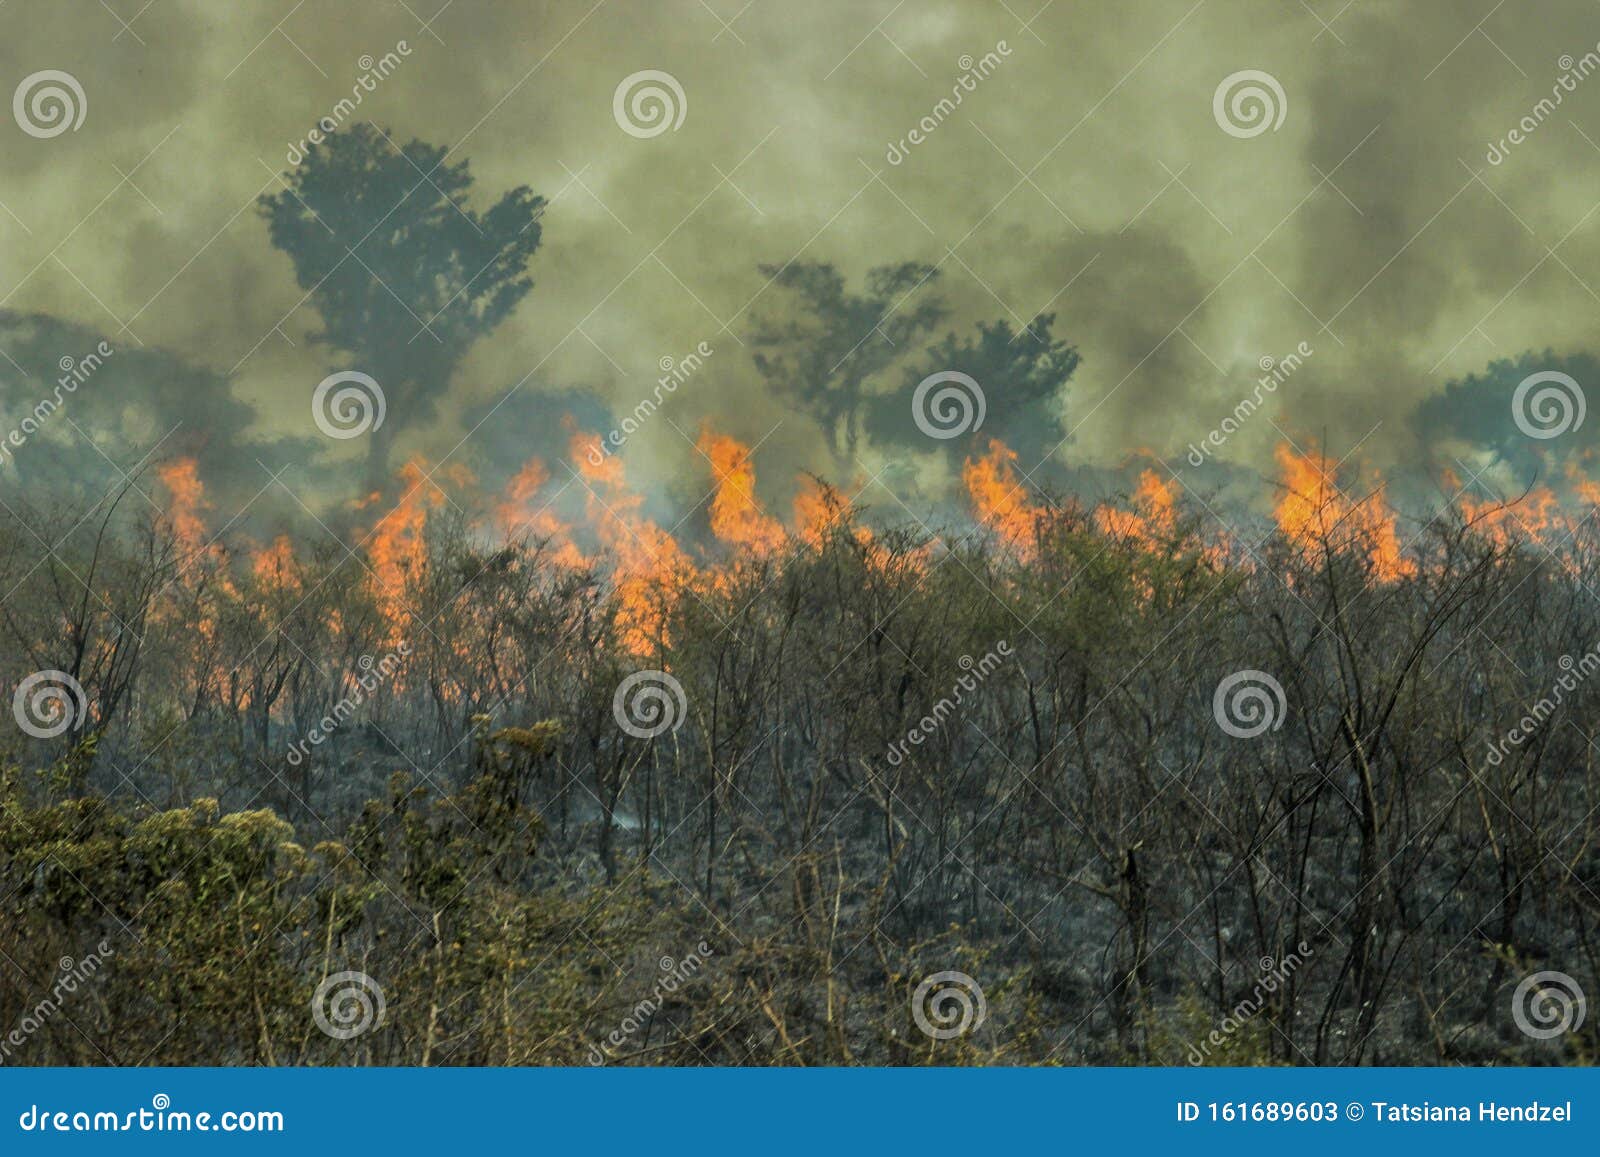 fires in the amazon forest - global climate change.